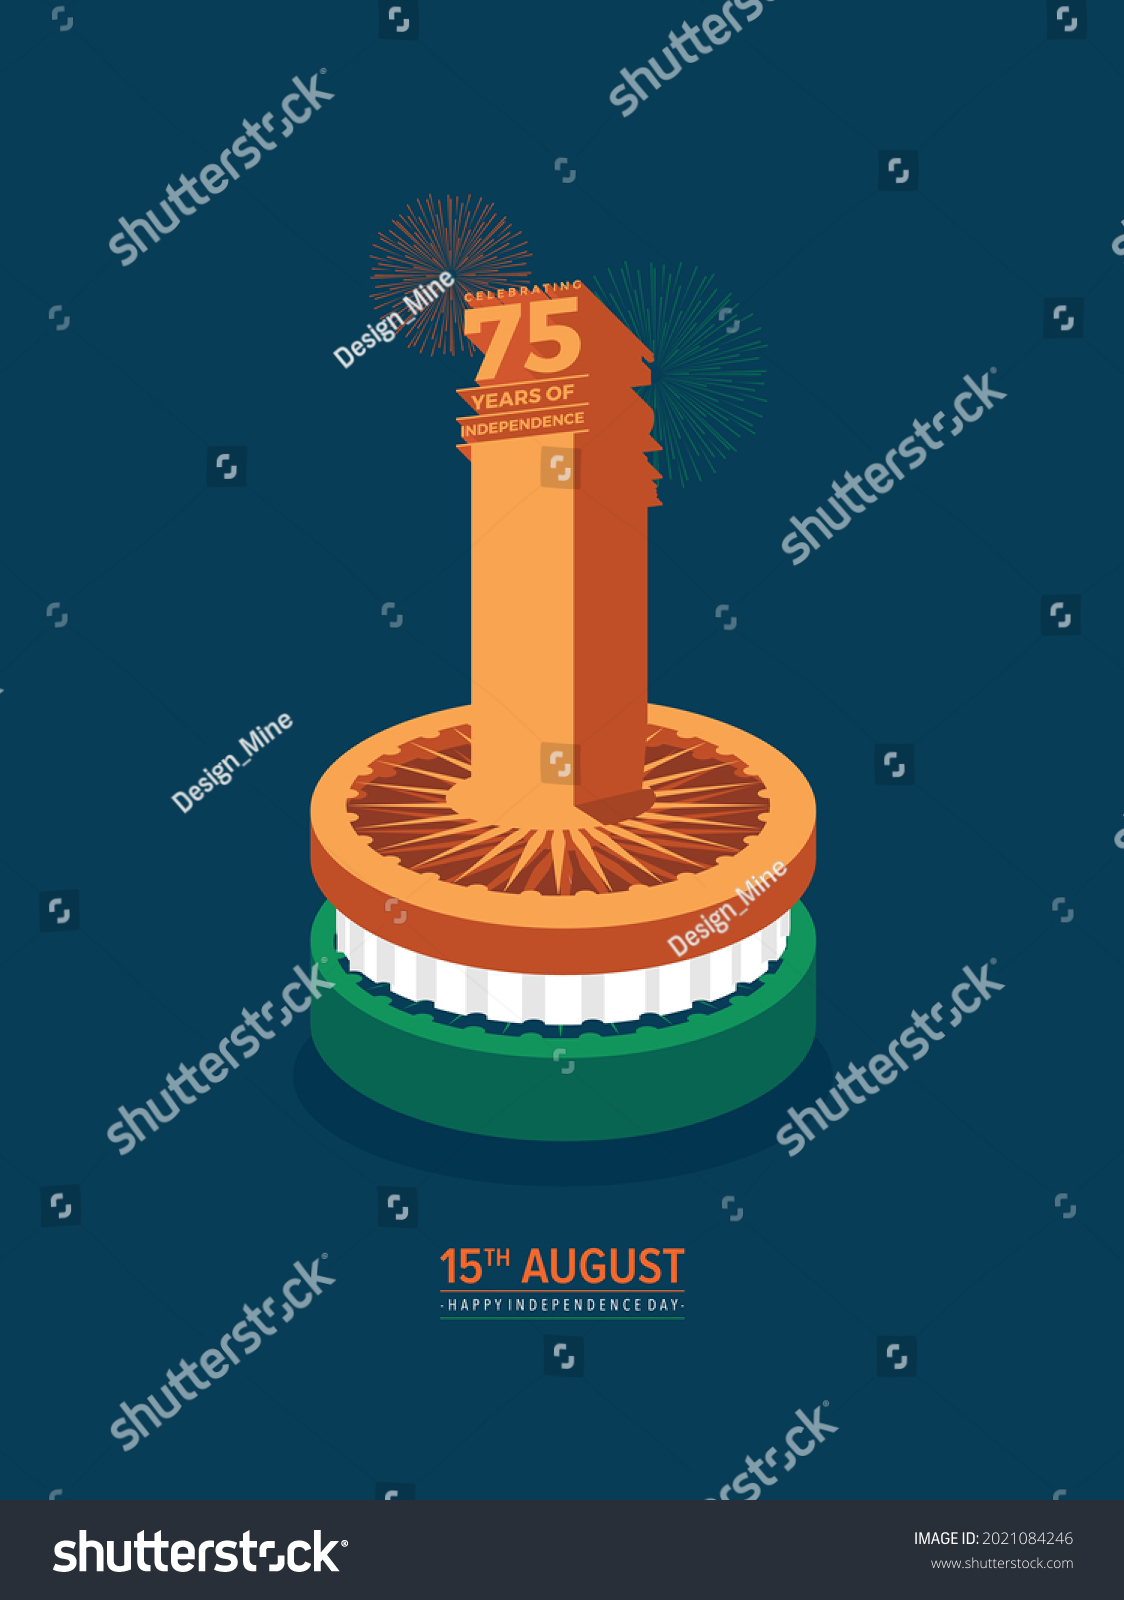 SVG of Celebrating the 75th year of India's Independence. Creative design for posters, banners, advertising, etc. Happy Independence Day. Tricolor Indian Parliament. Editable svg